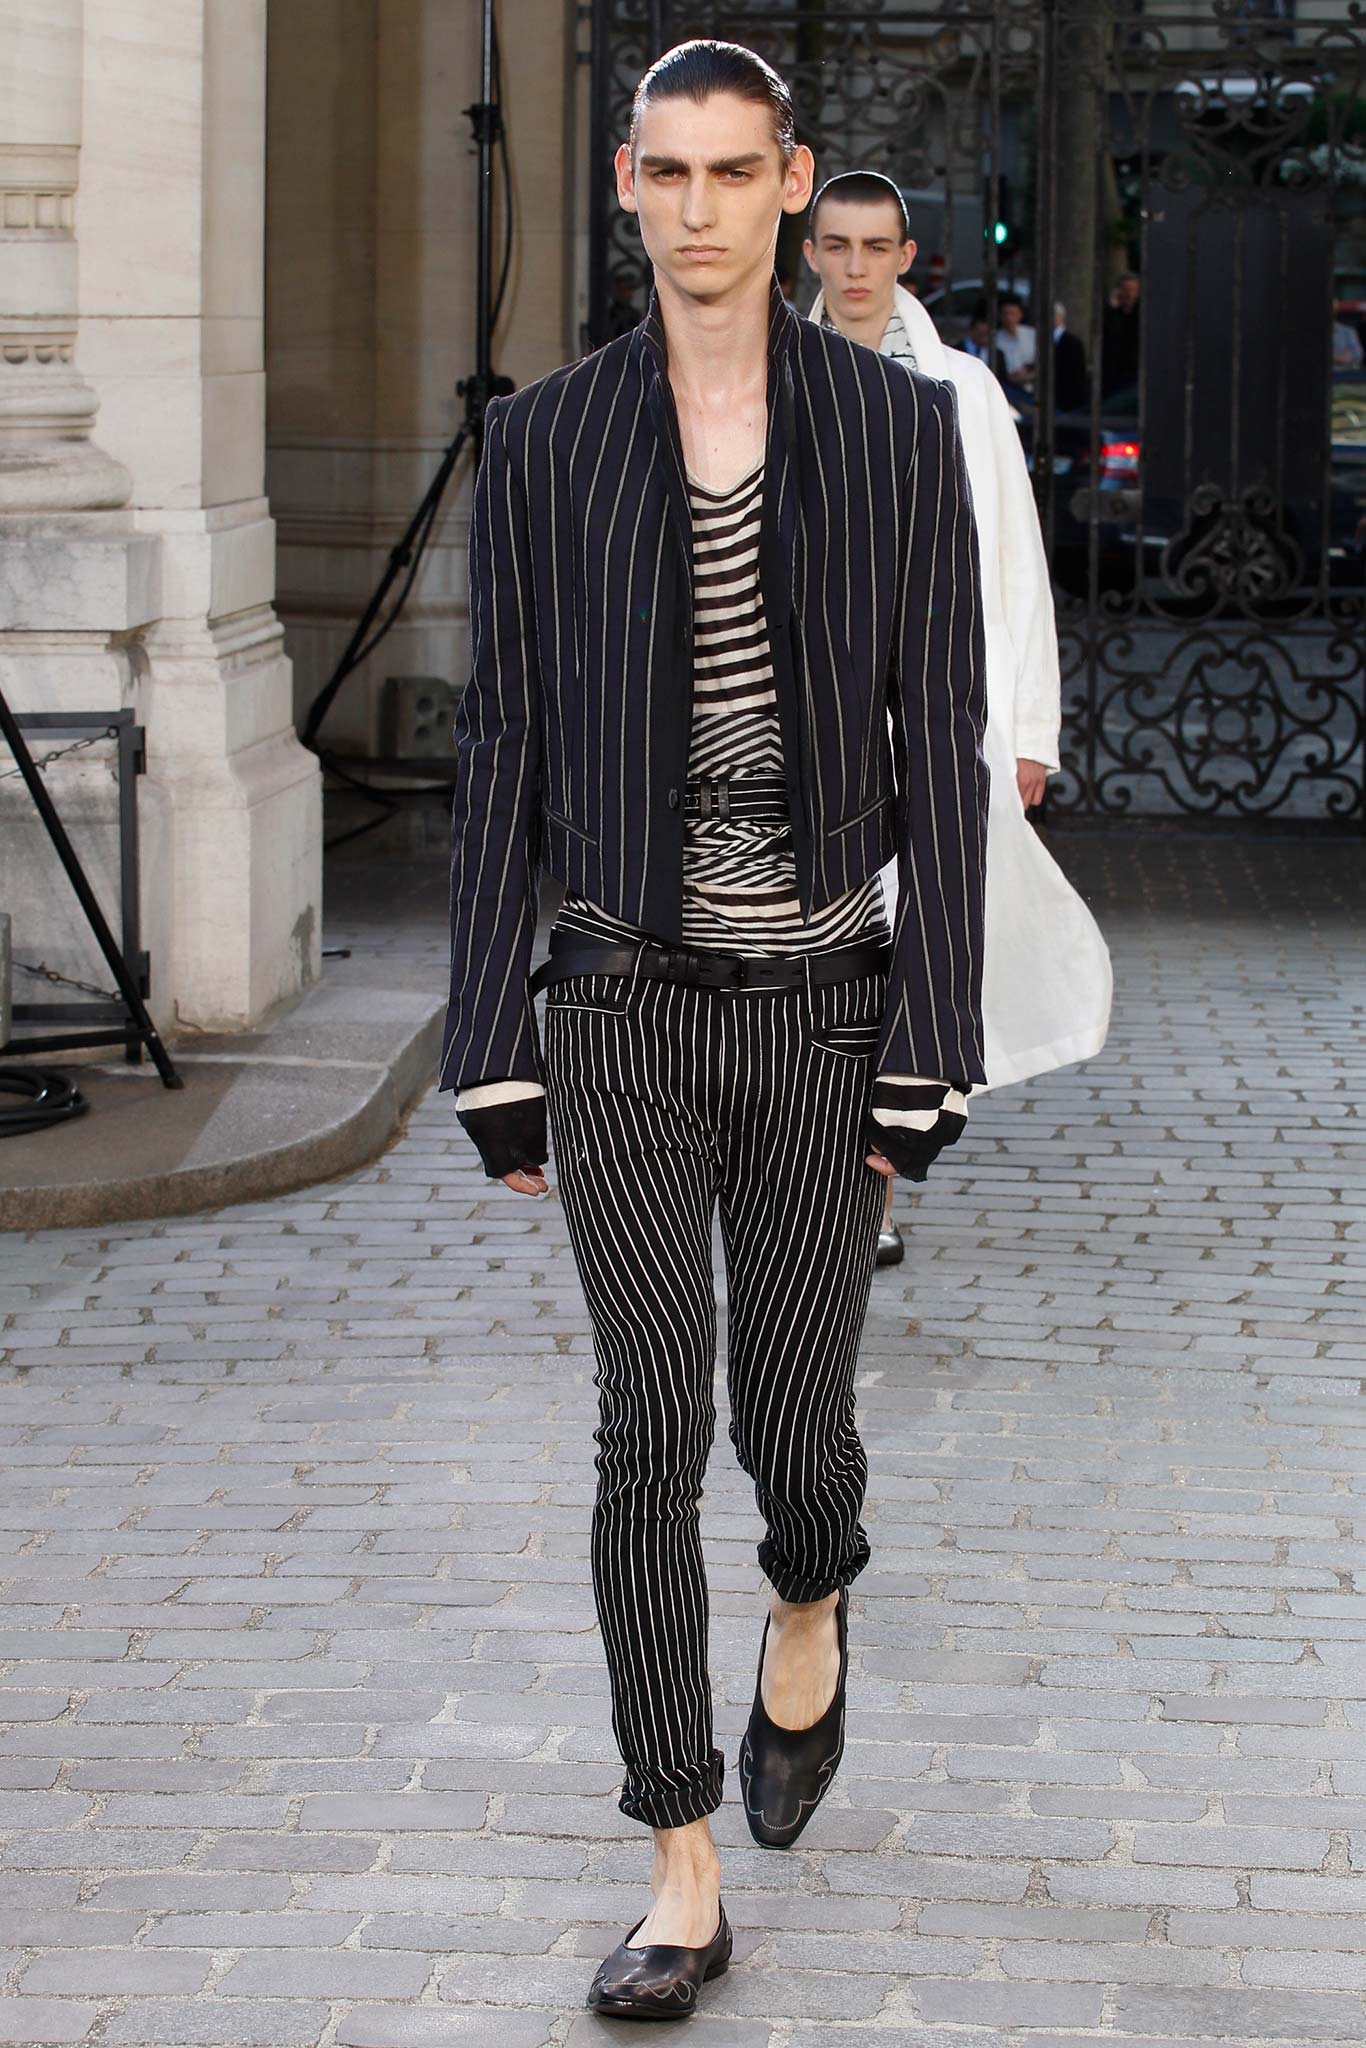 spring-2016-menswear-trends-04-long-striped-suits-03